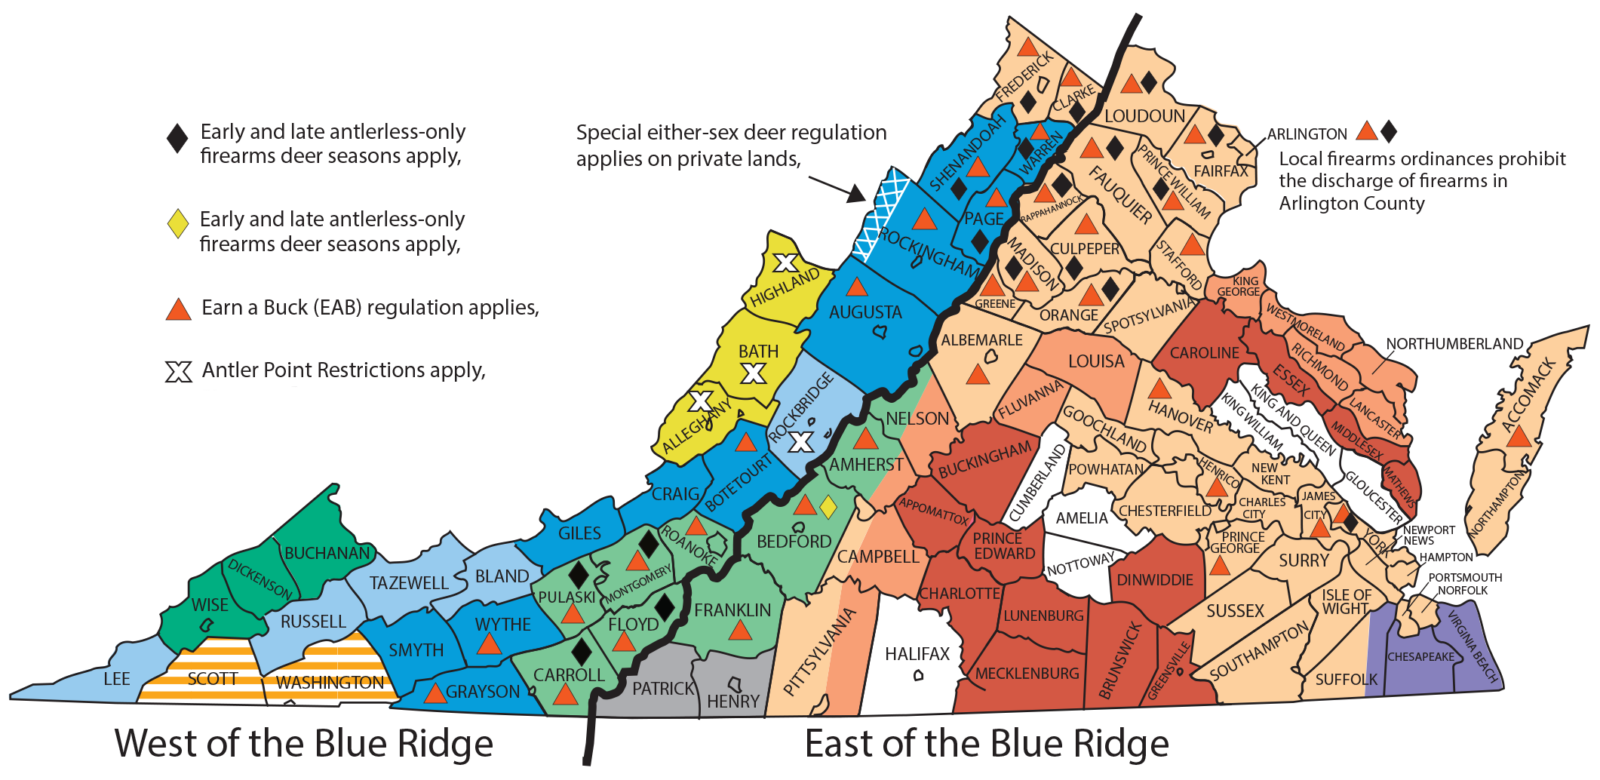 Click to open an expanded map of the Virginia Deer hunting regulations